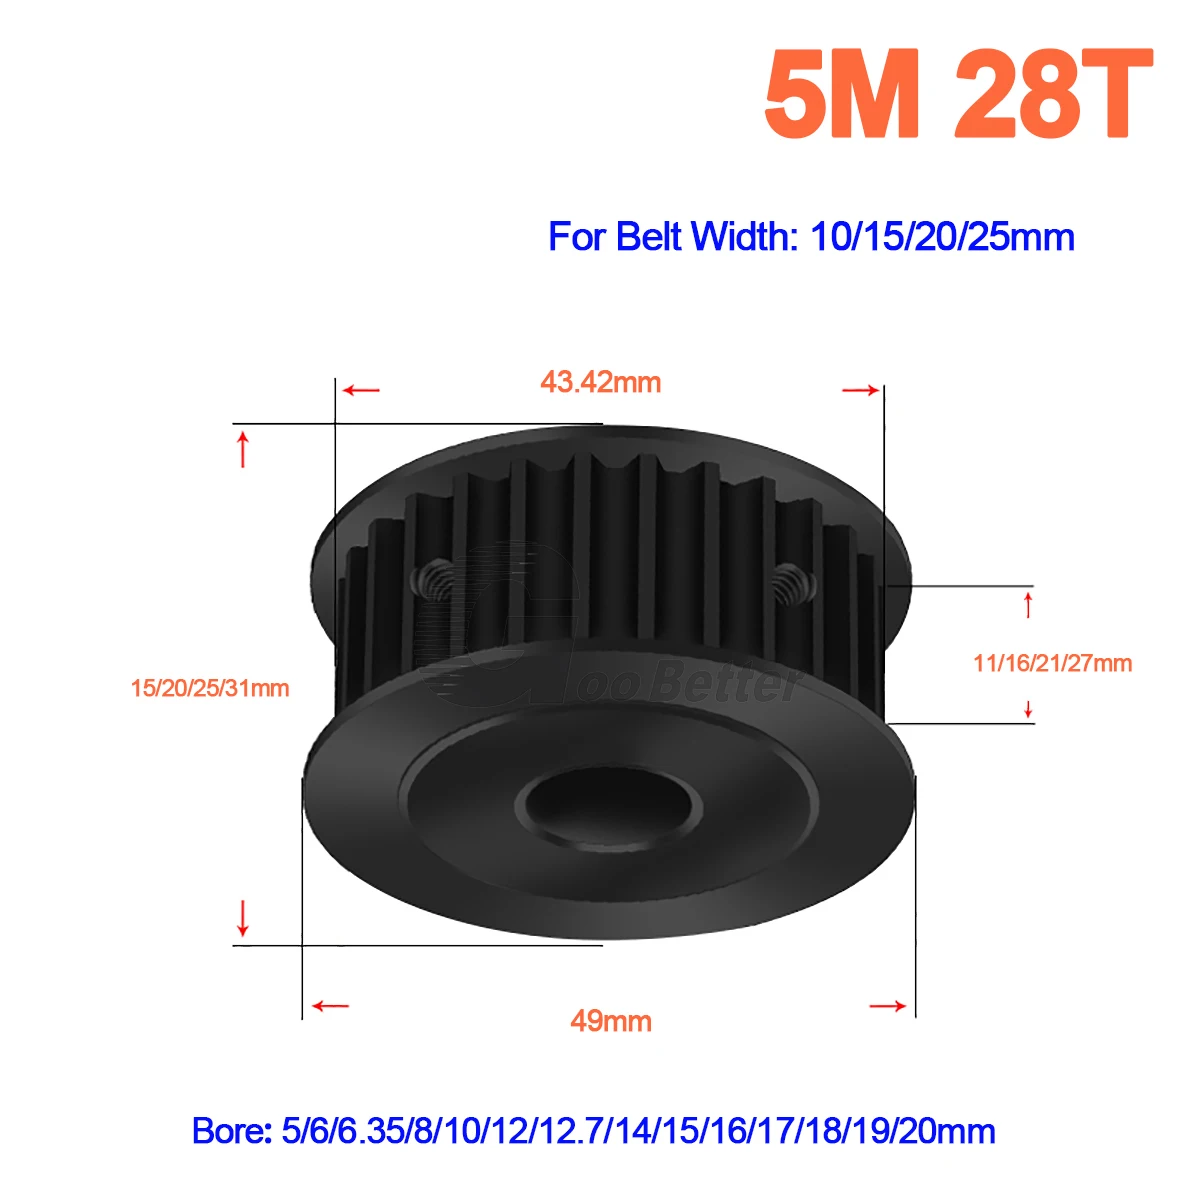 

HTD5M 28 Teeth Synchronous Pulley 45 Steel Slot Width 11/16/21/27mm Industrial Transmission Pulley AF 5M-28T Timing Belt Pulley